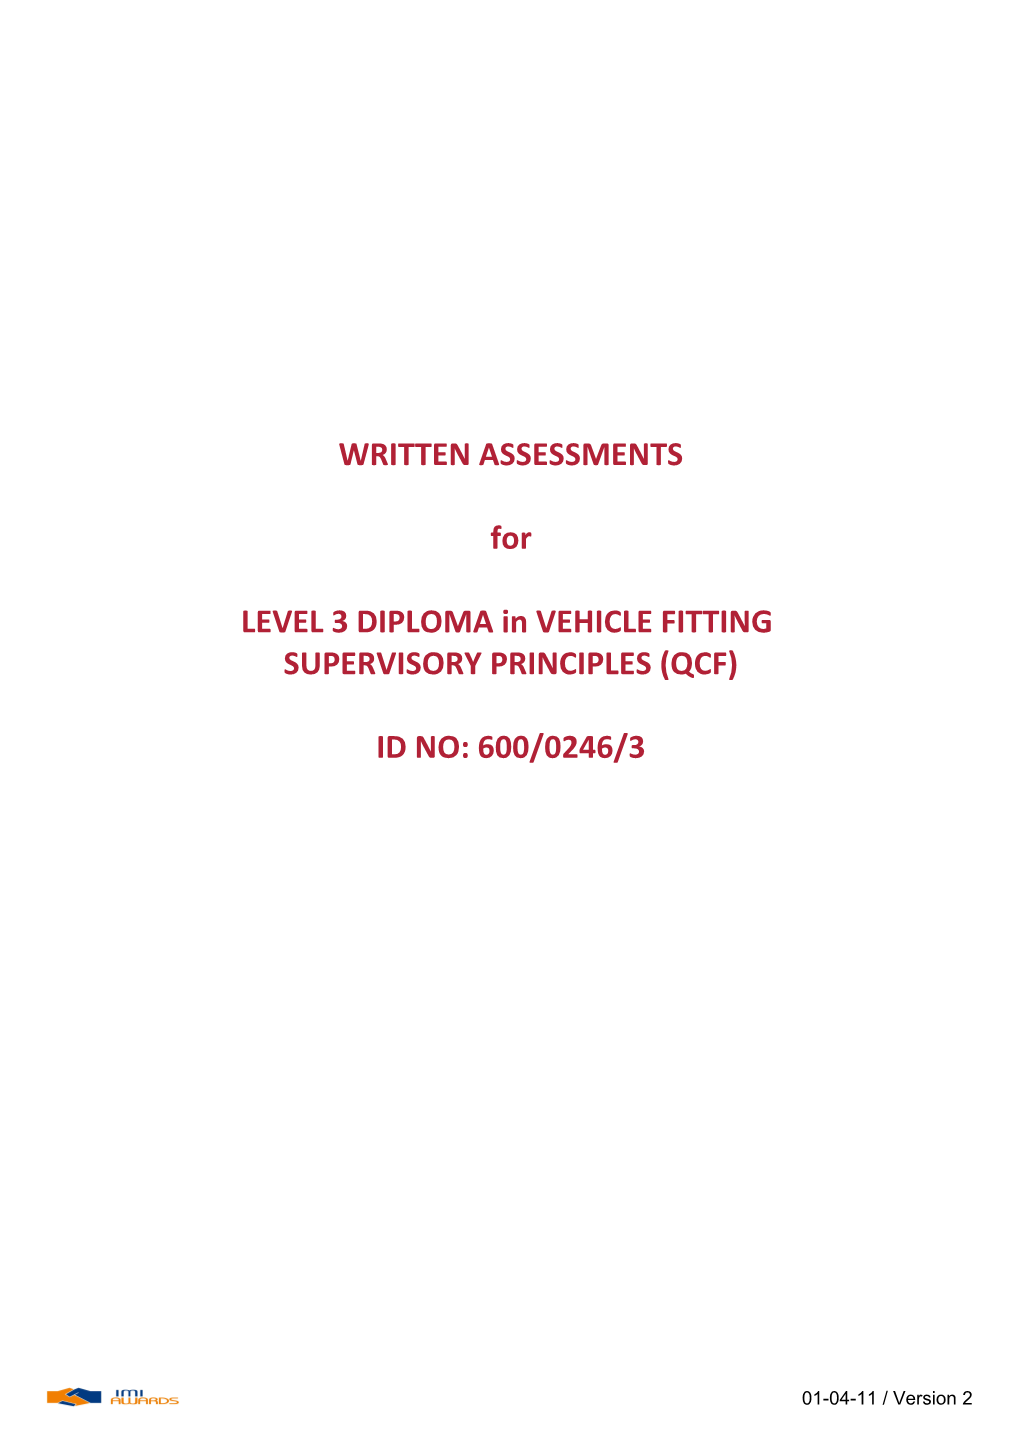 LEVEL 3 DIPLOMA in VEHICLE FITTING